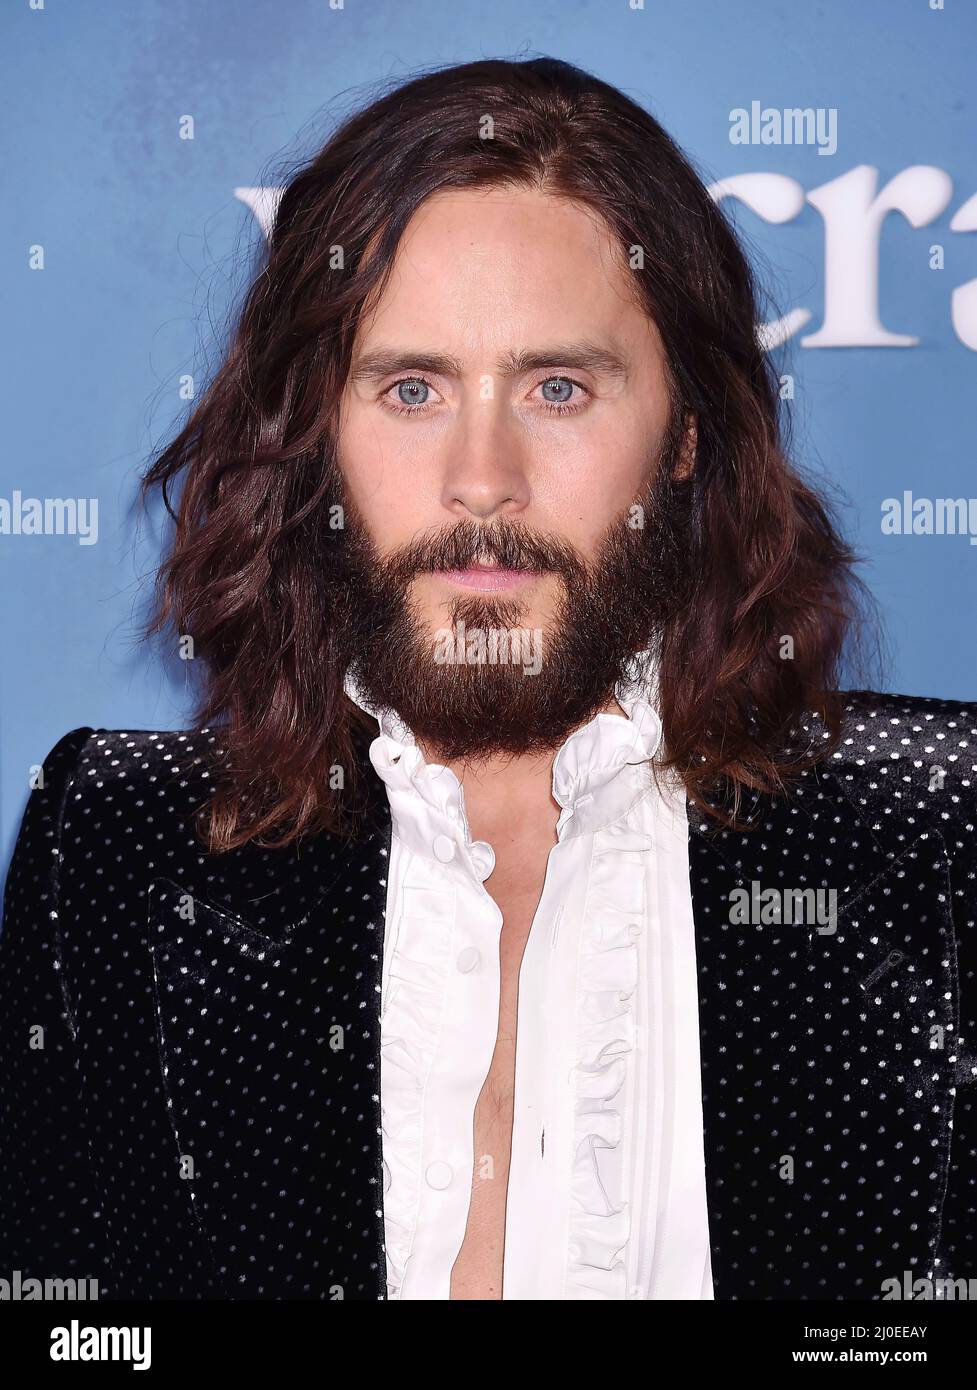 Los Angeles, CA. 17th Mar 2022. Jared Leto partecipa alla prima mondiale del 'WeCrashed' di Apple TV all'Academy Museum of Motion Pictures il 17 marzo 2022 a Los Angeles, California. Credit: Jeffrey Mayer/JTM Photos/Media Punch/Alamy Live News Foto Stock